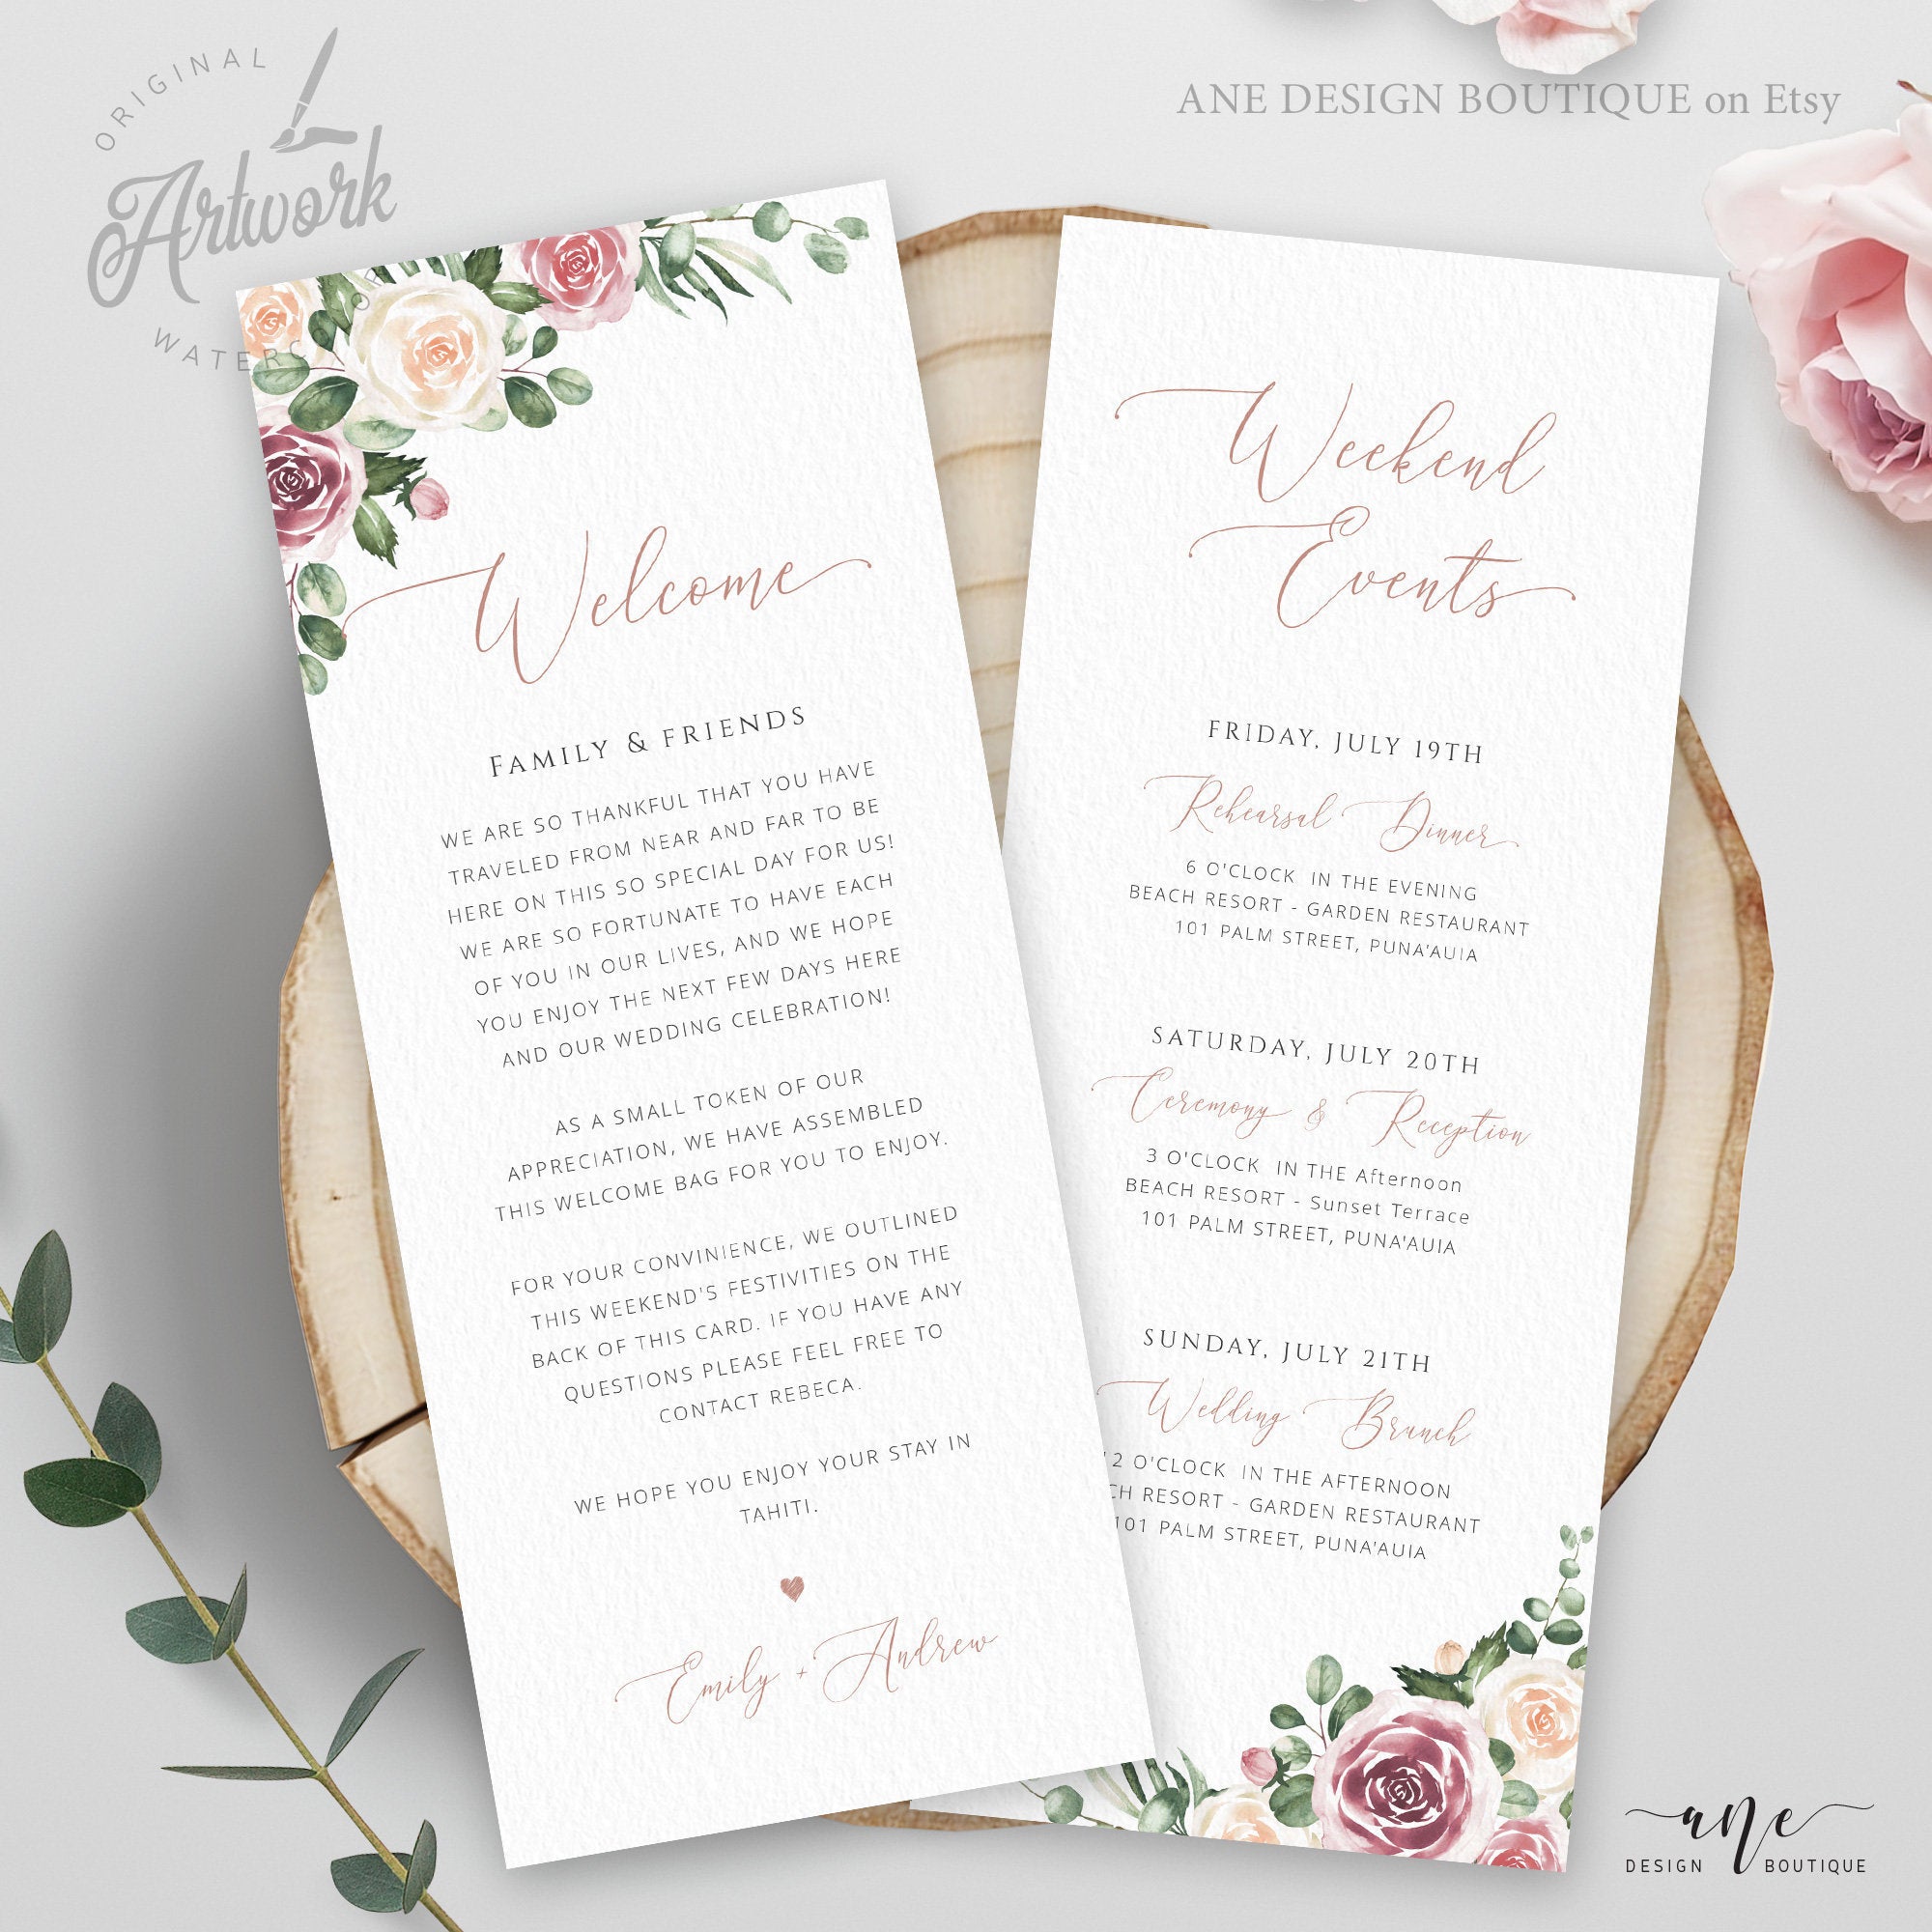 Wedding Welcome Bag Note Welcome Bag Letter Printable 